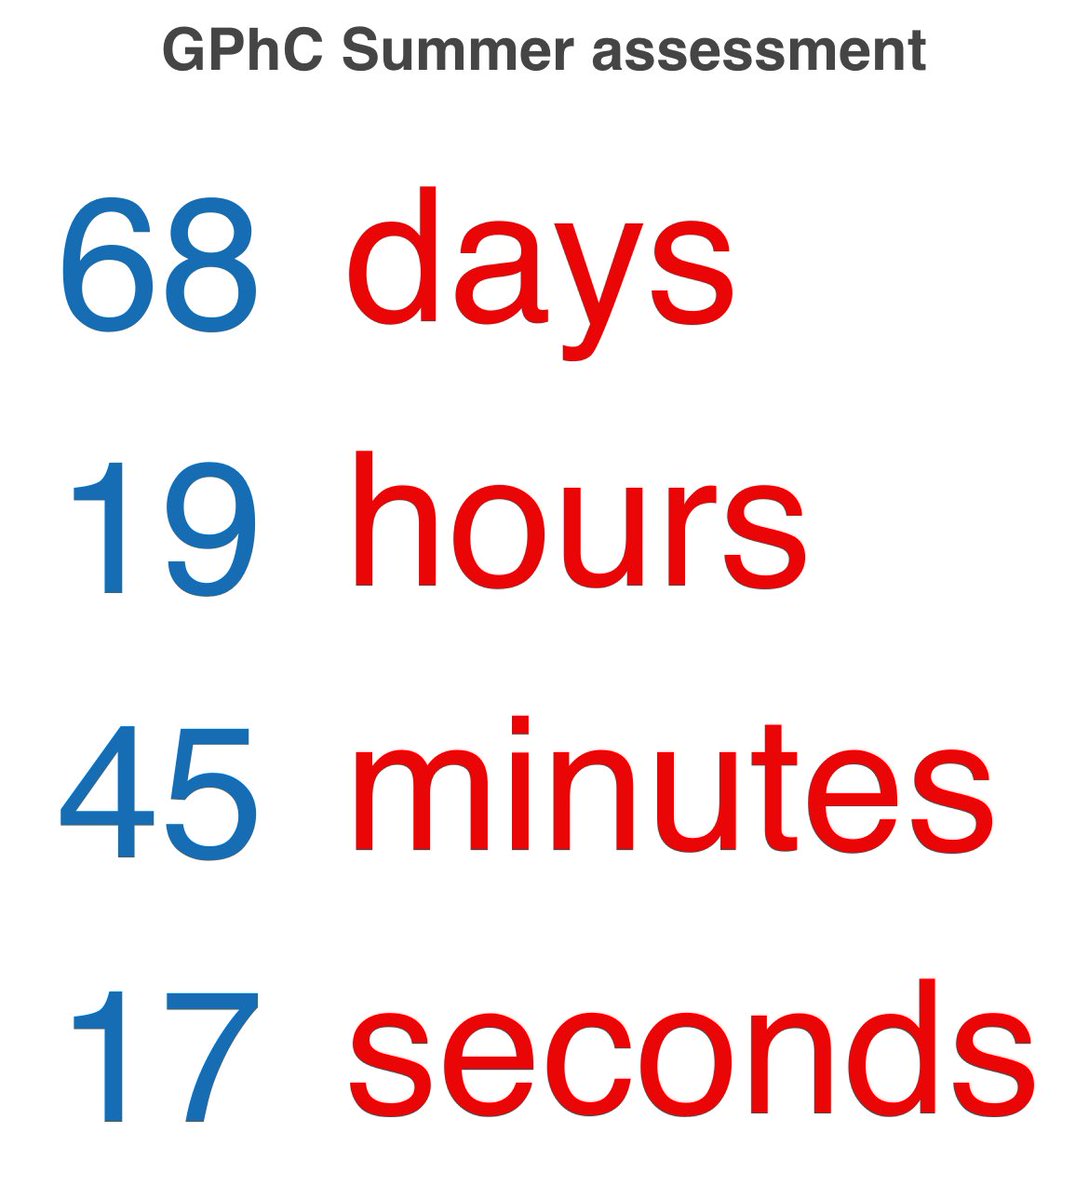 As usual I created a handy @TheGPhC Summer Assessment countdown clock for my foundation trainee pharmacists Strangely I’d describe the reception as ‘Lukewarm’. Here is the link: Tinyurl.com/gphca